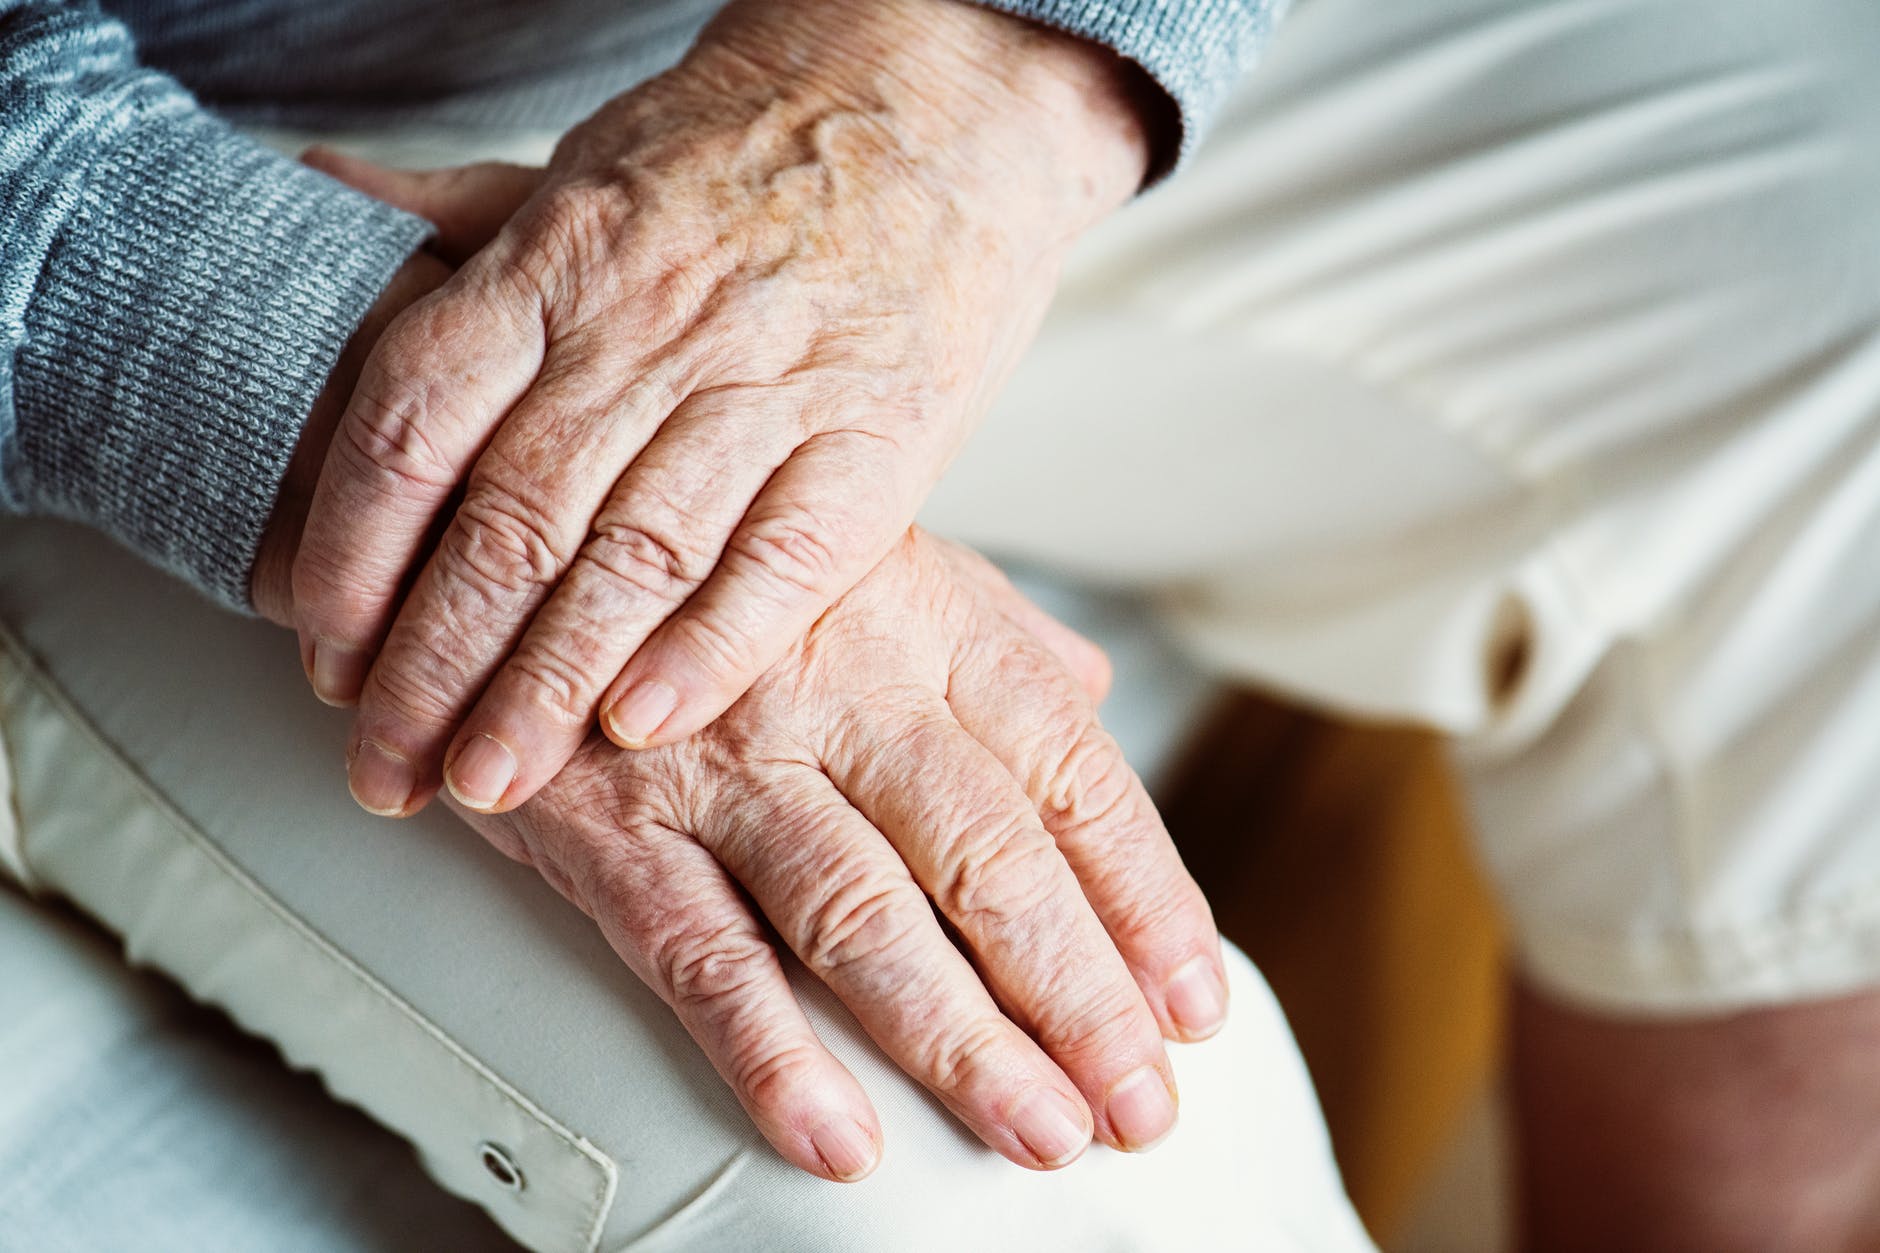 Steps Aging Adults Can Take To Stay Safe In the Home